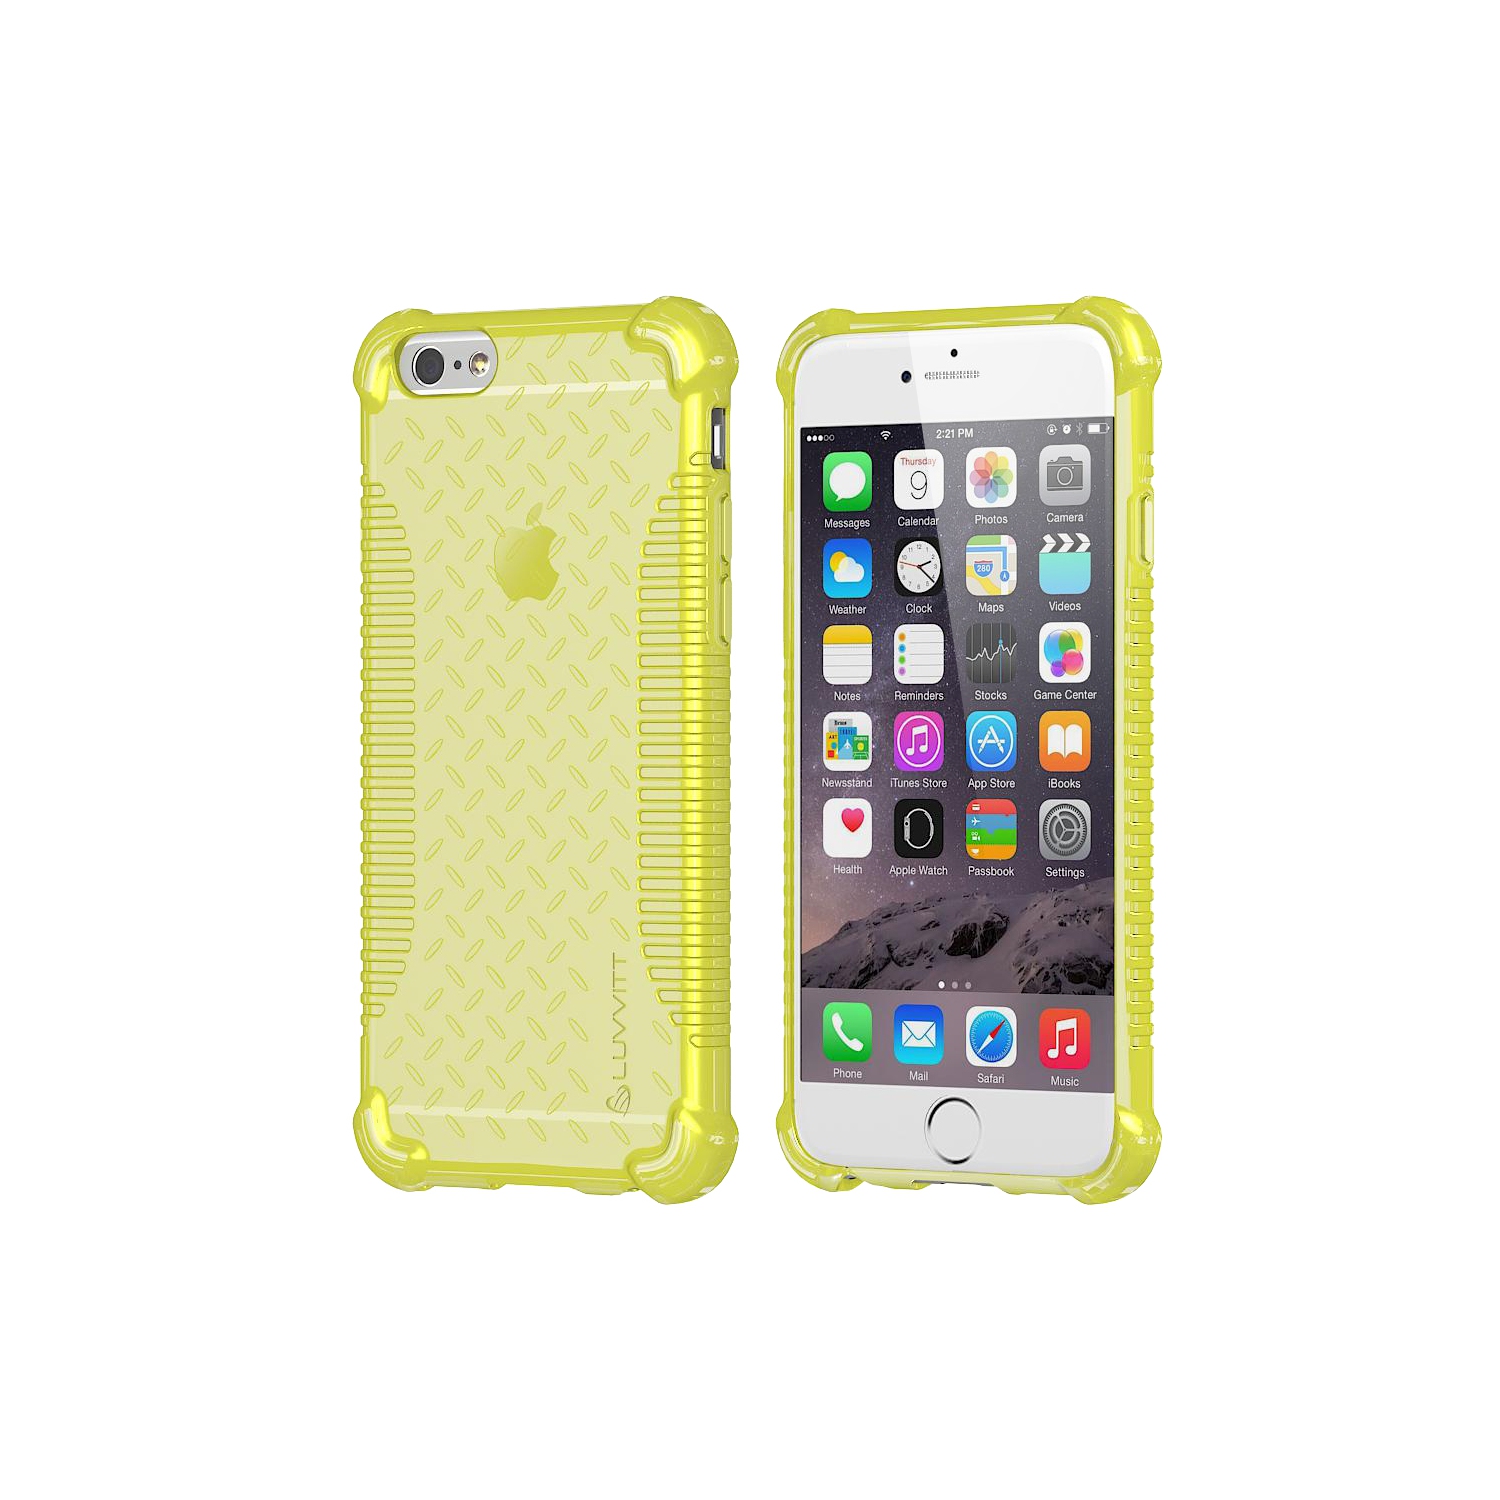 LUVVITT CLEAR GRIP iPhone 6 / 6S Case | Soft TPU Rubber Back Cover